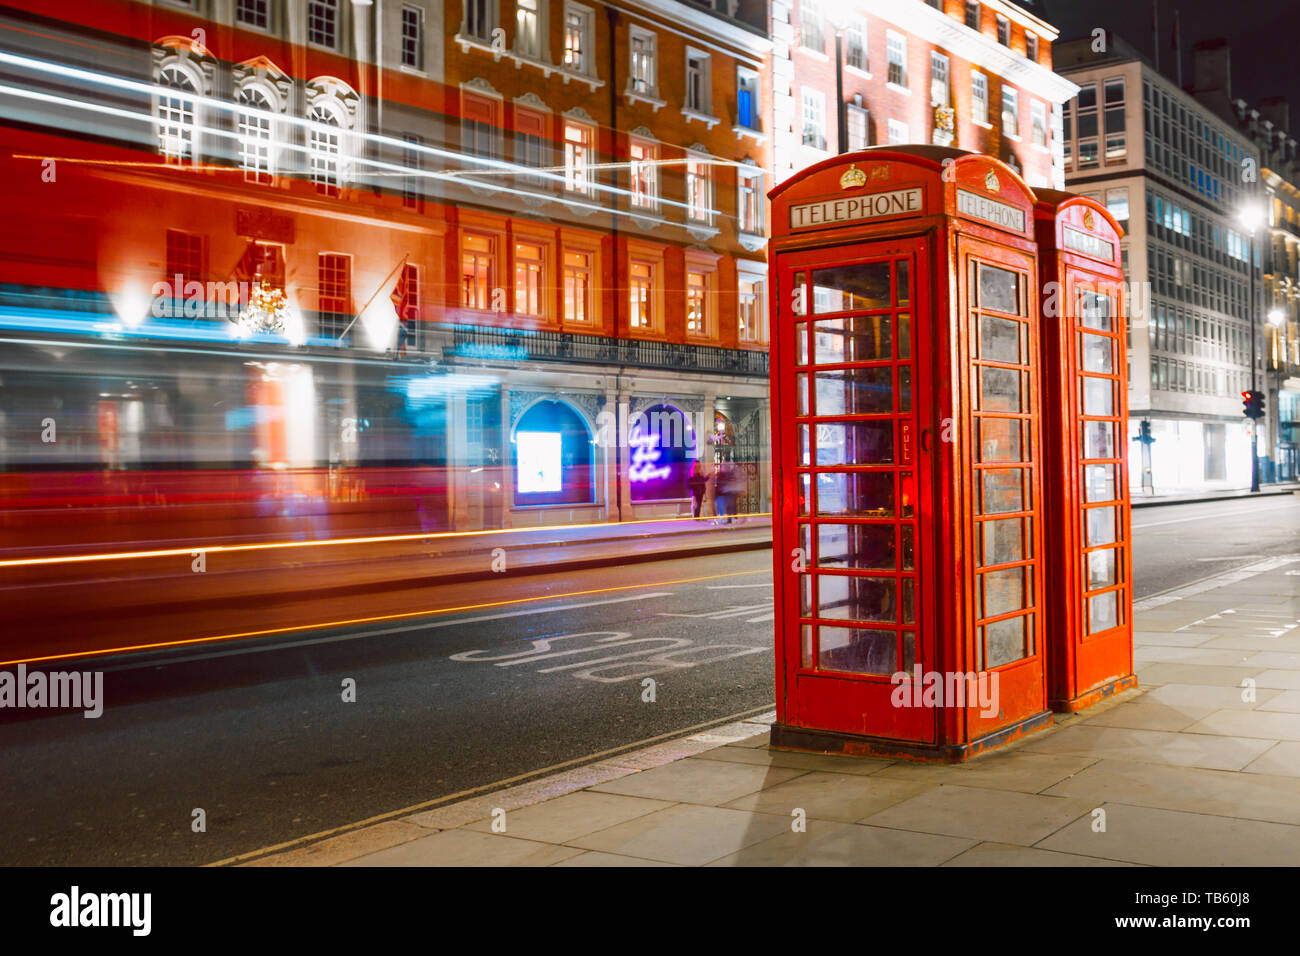 Light trails of a double decker bus next to the iconic telephone booth in London Stock Photo